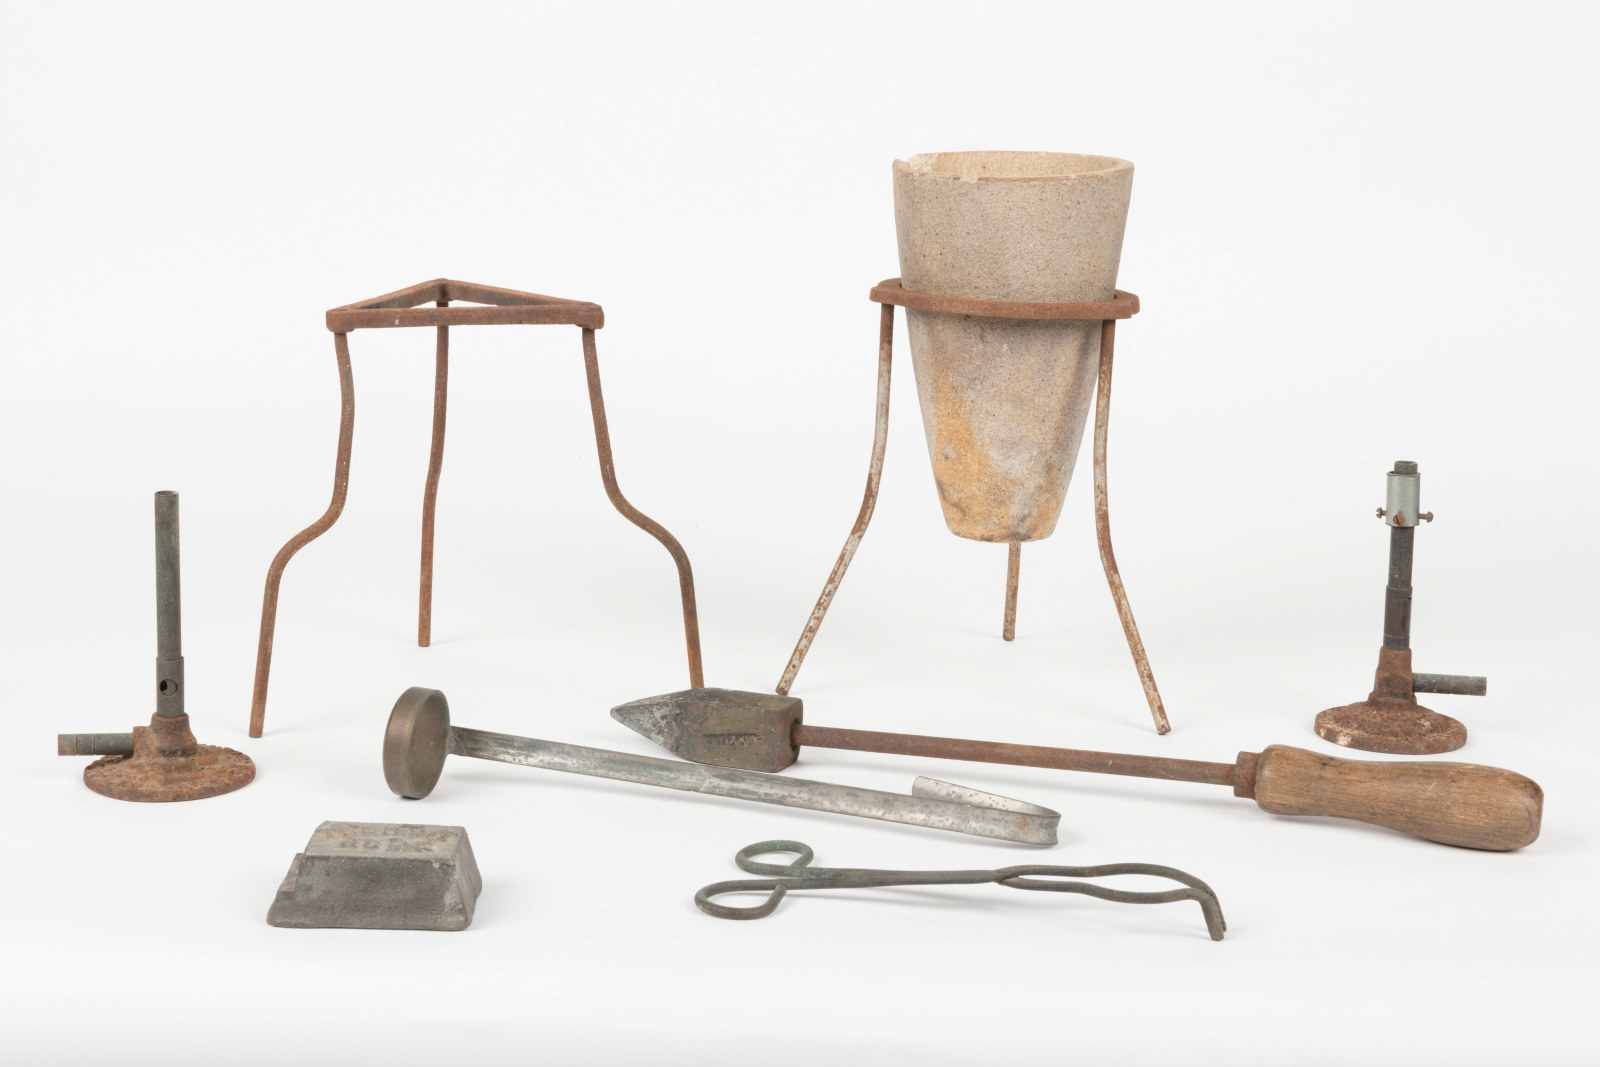 Stoneware assayer's crucible and collection of related objects